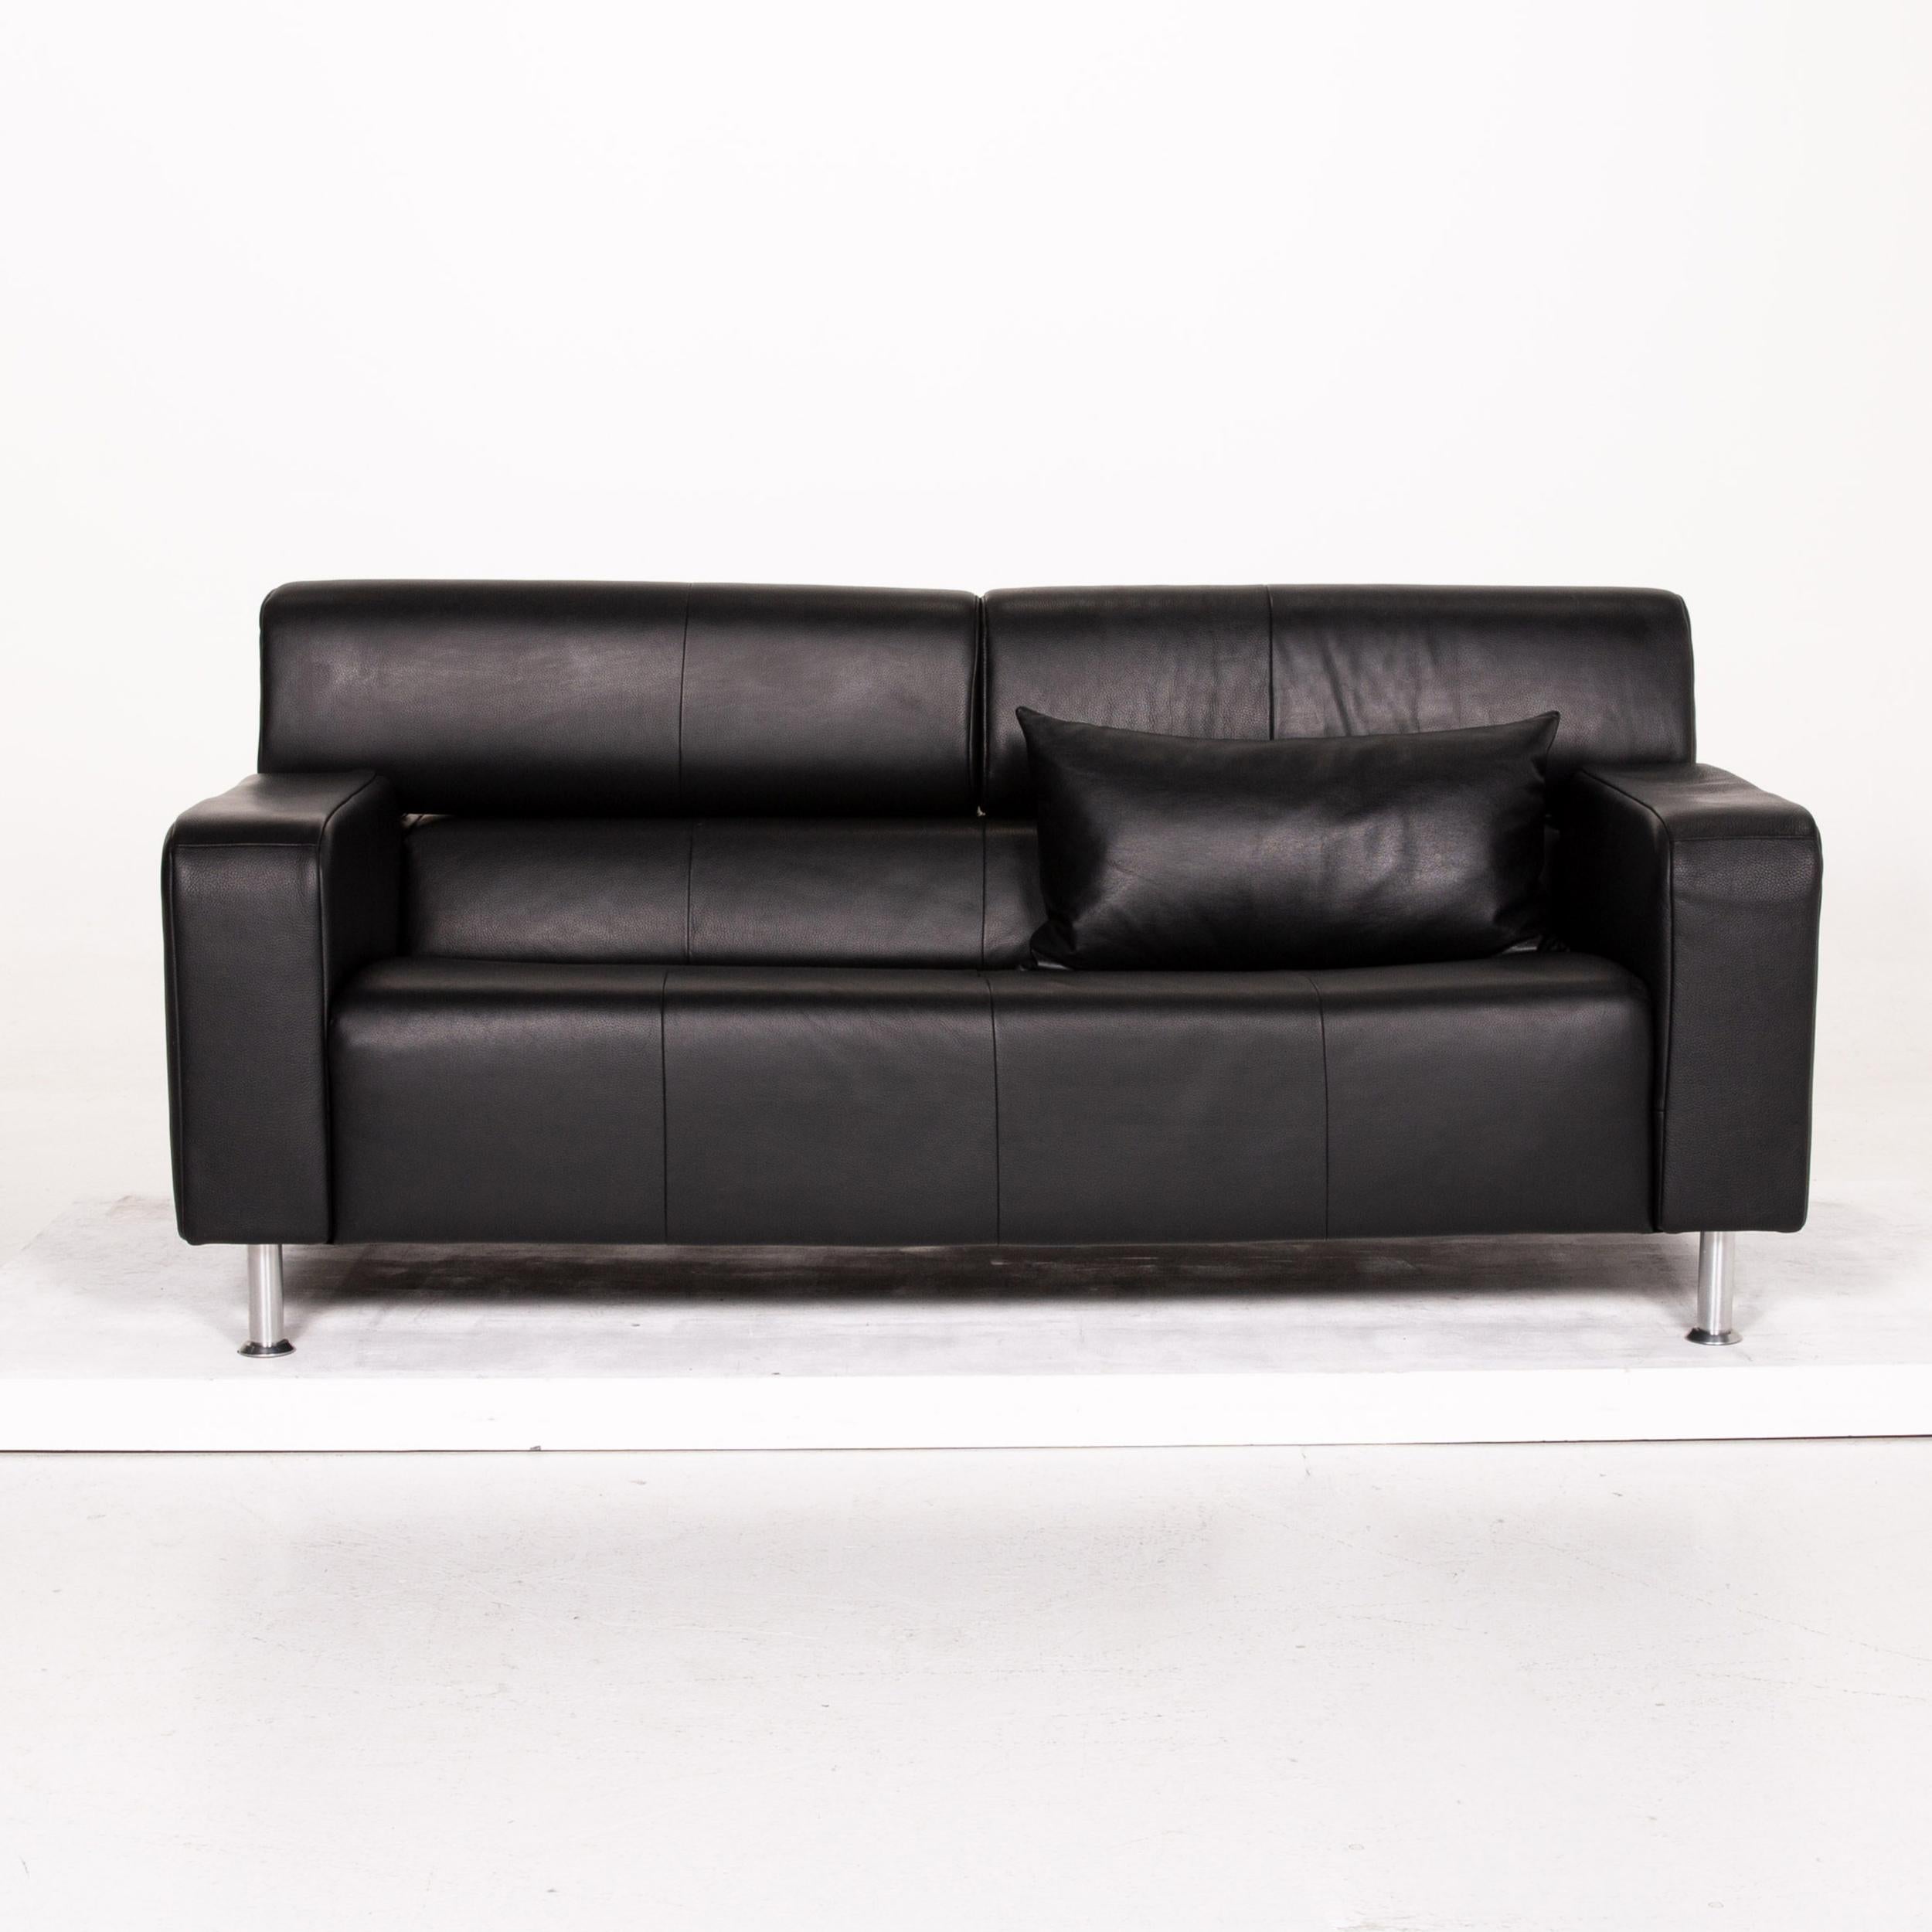 German Rolf Benz AK 422 Leather Sofa Black Three-Seat Couch For Sale